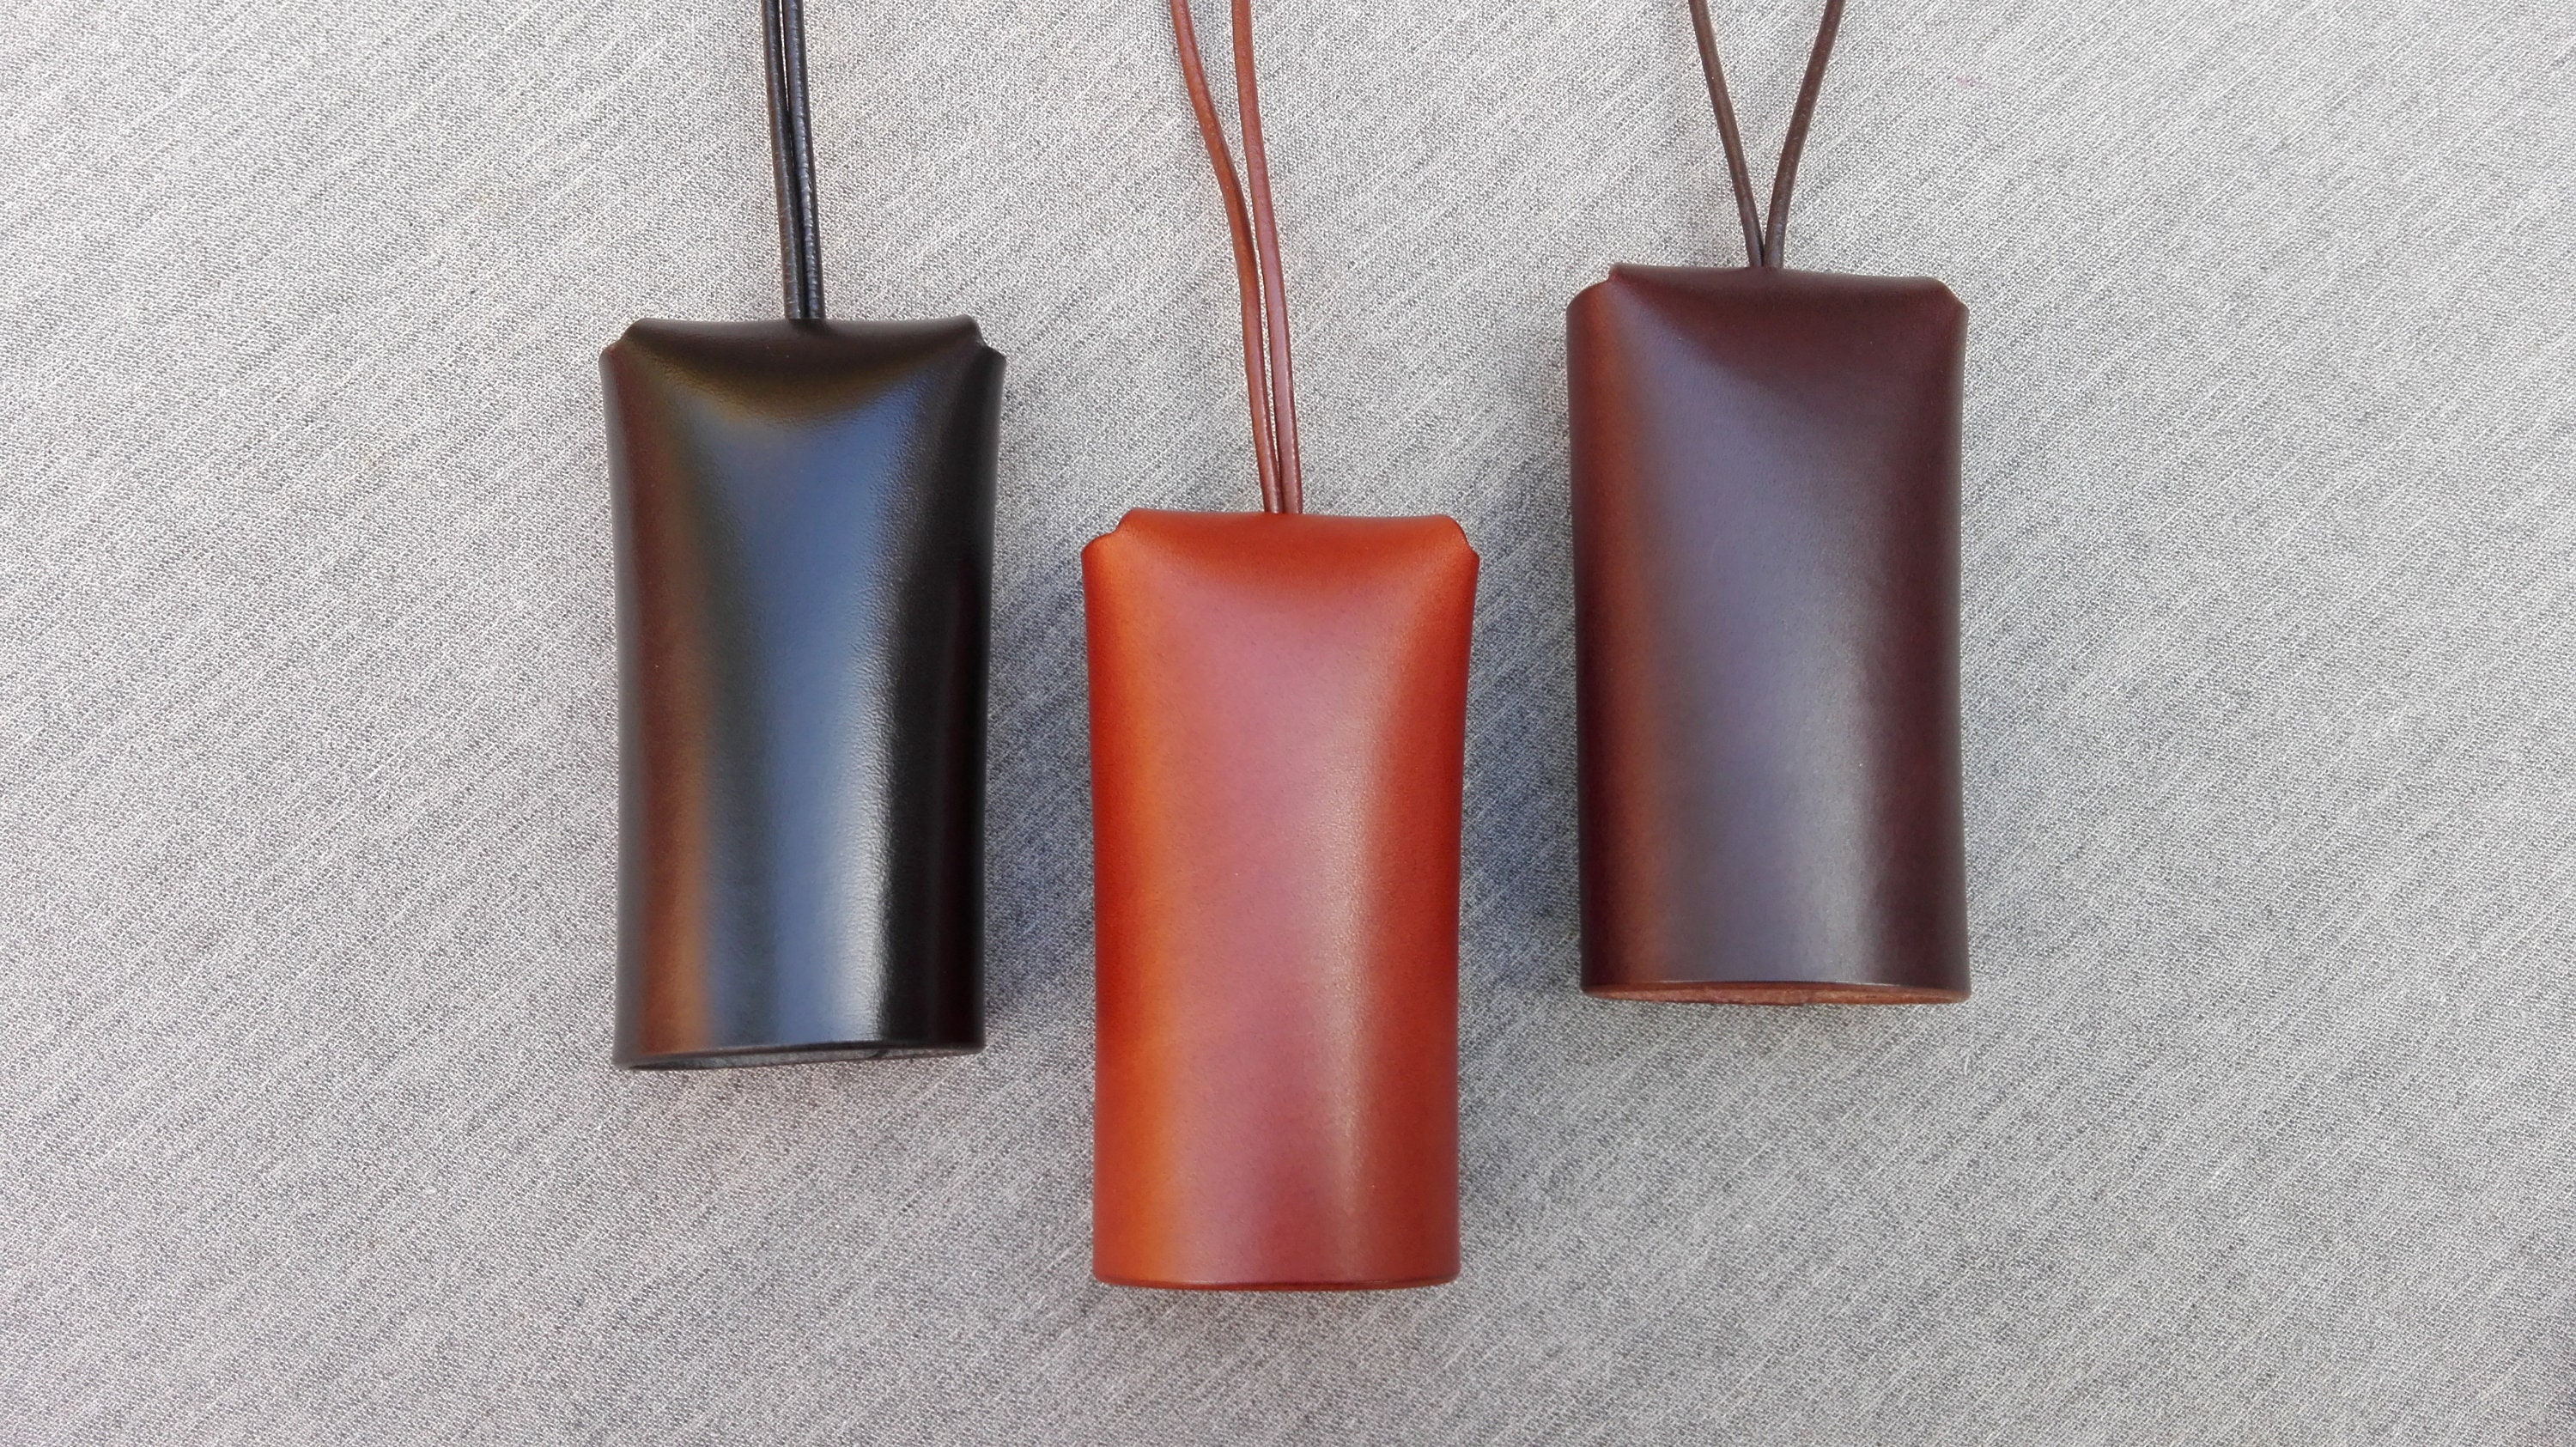 Vachetta Leather and Brown Key Bell Clochette Hot Stamp -  Israel